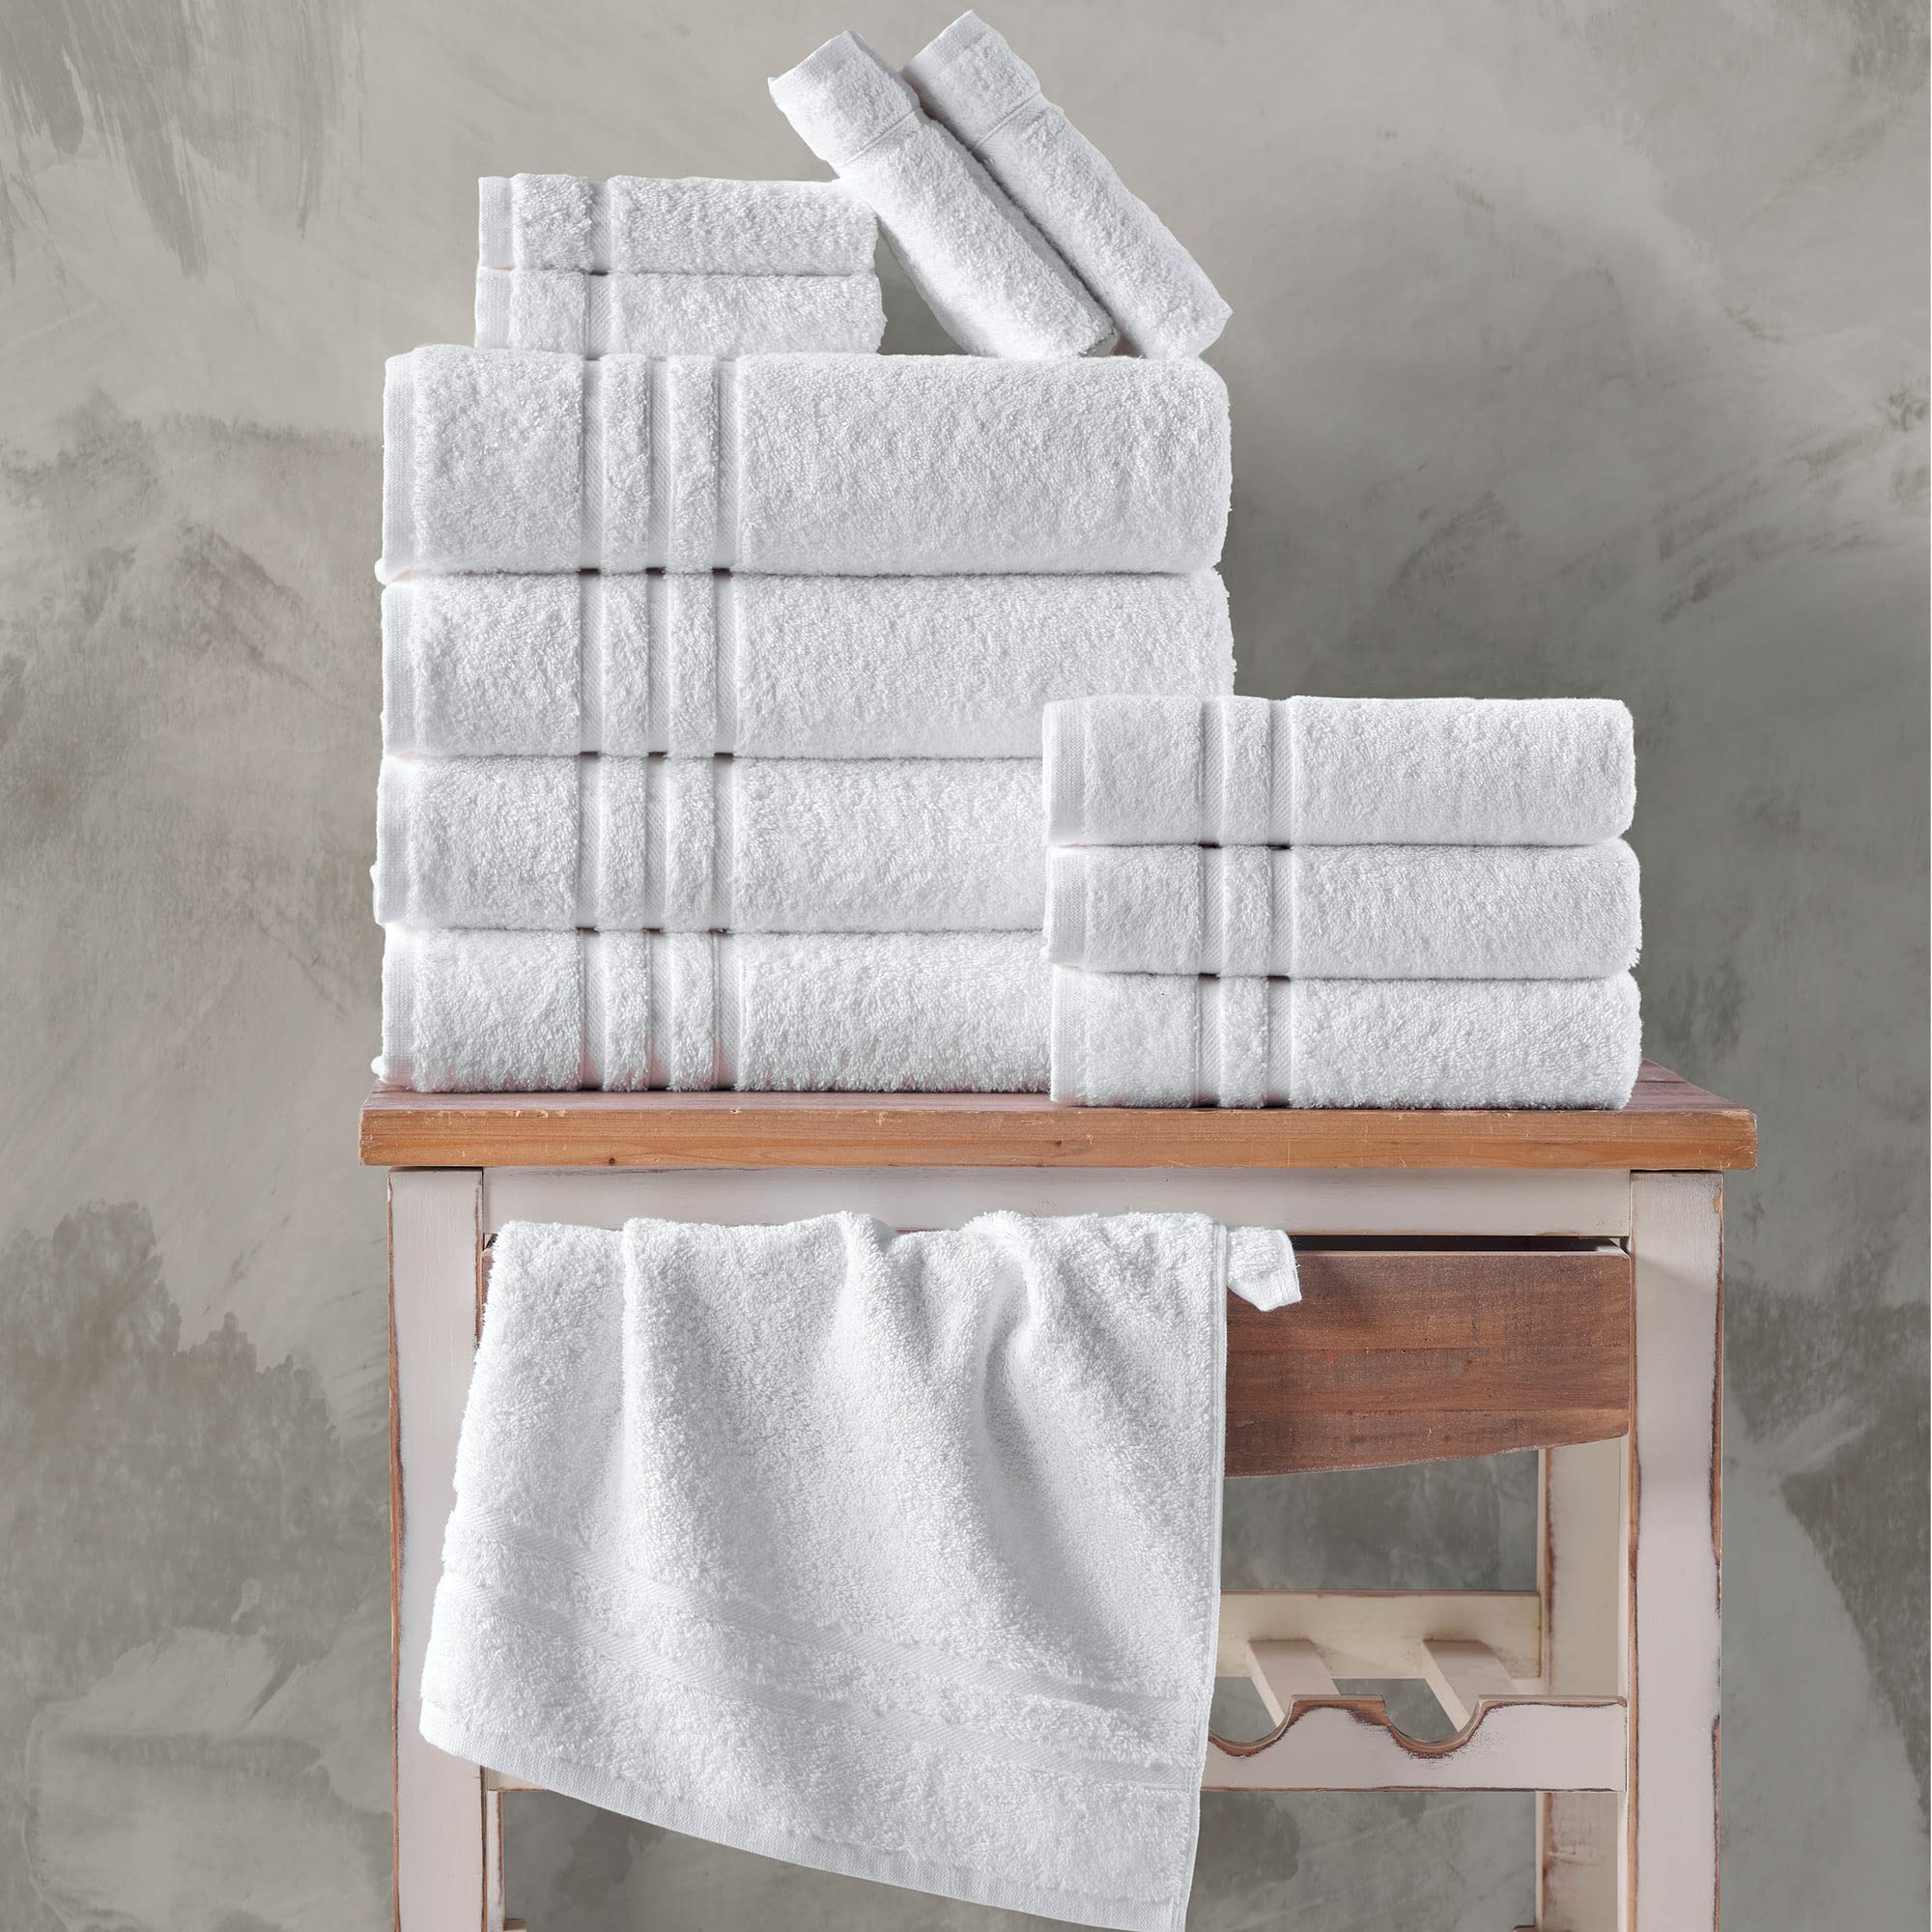 Hammam Linen White Bath Towels 4-Pack - 27x54 Soft and Absorbent, Premium Quality Perfect for Daily Use 100% cotton Towel 600 gS